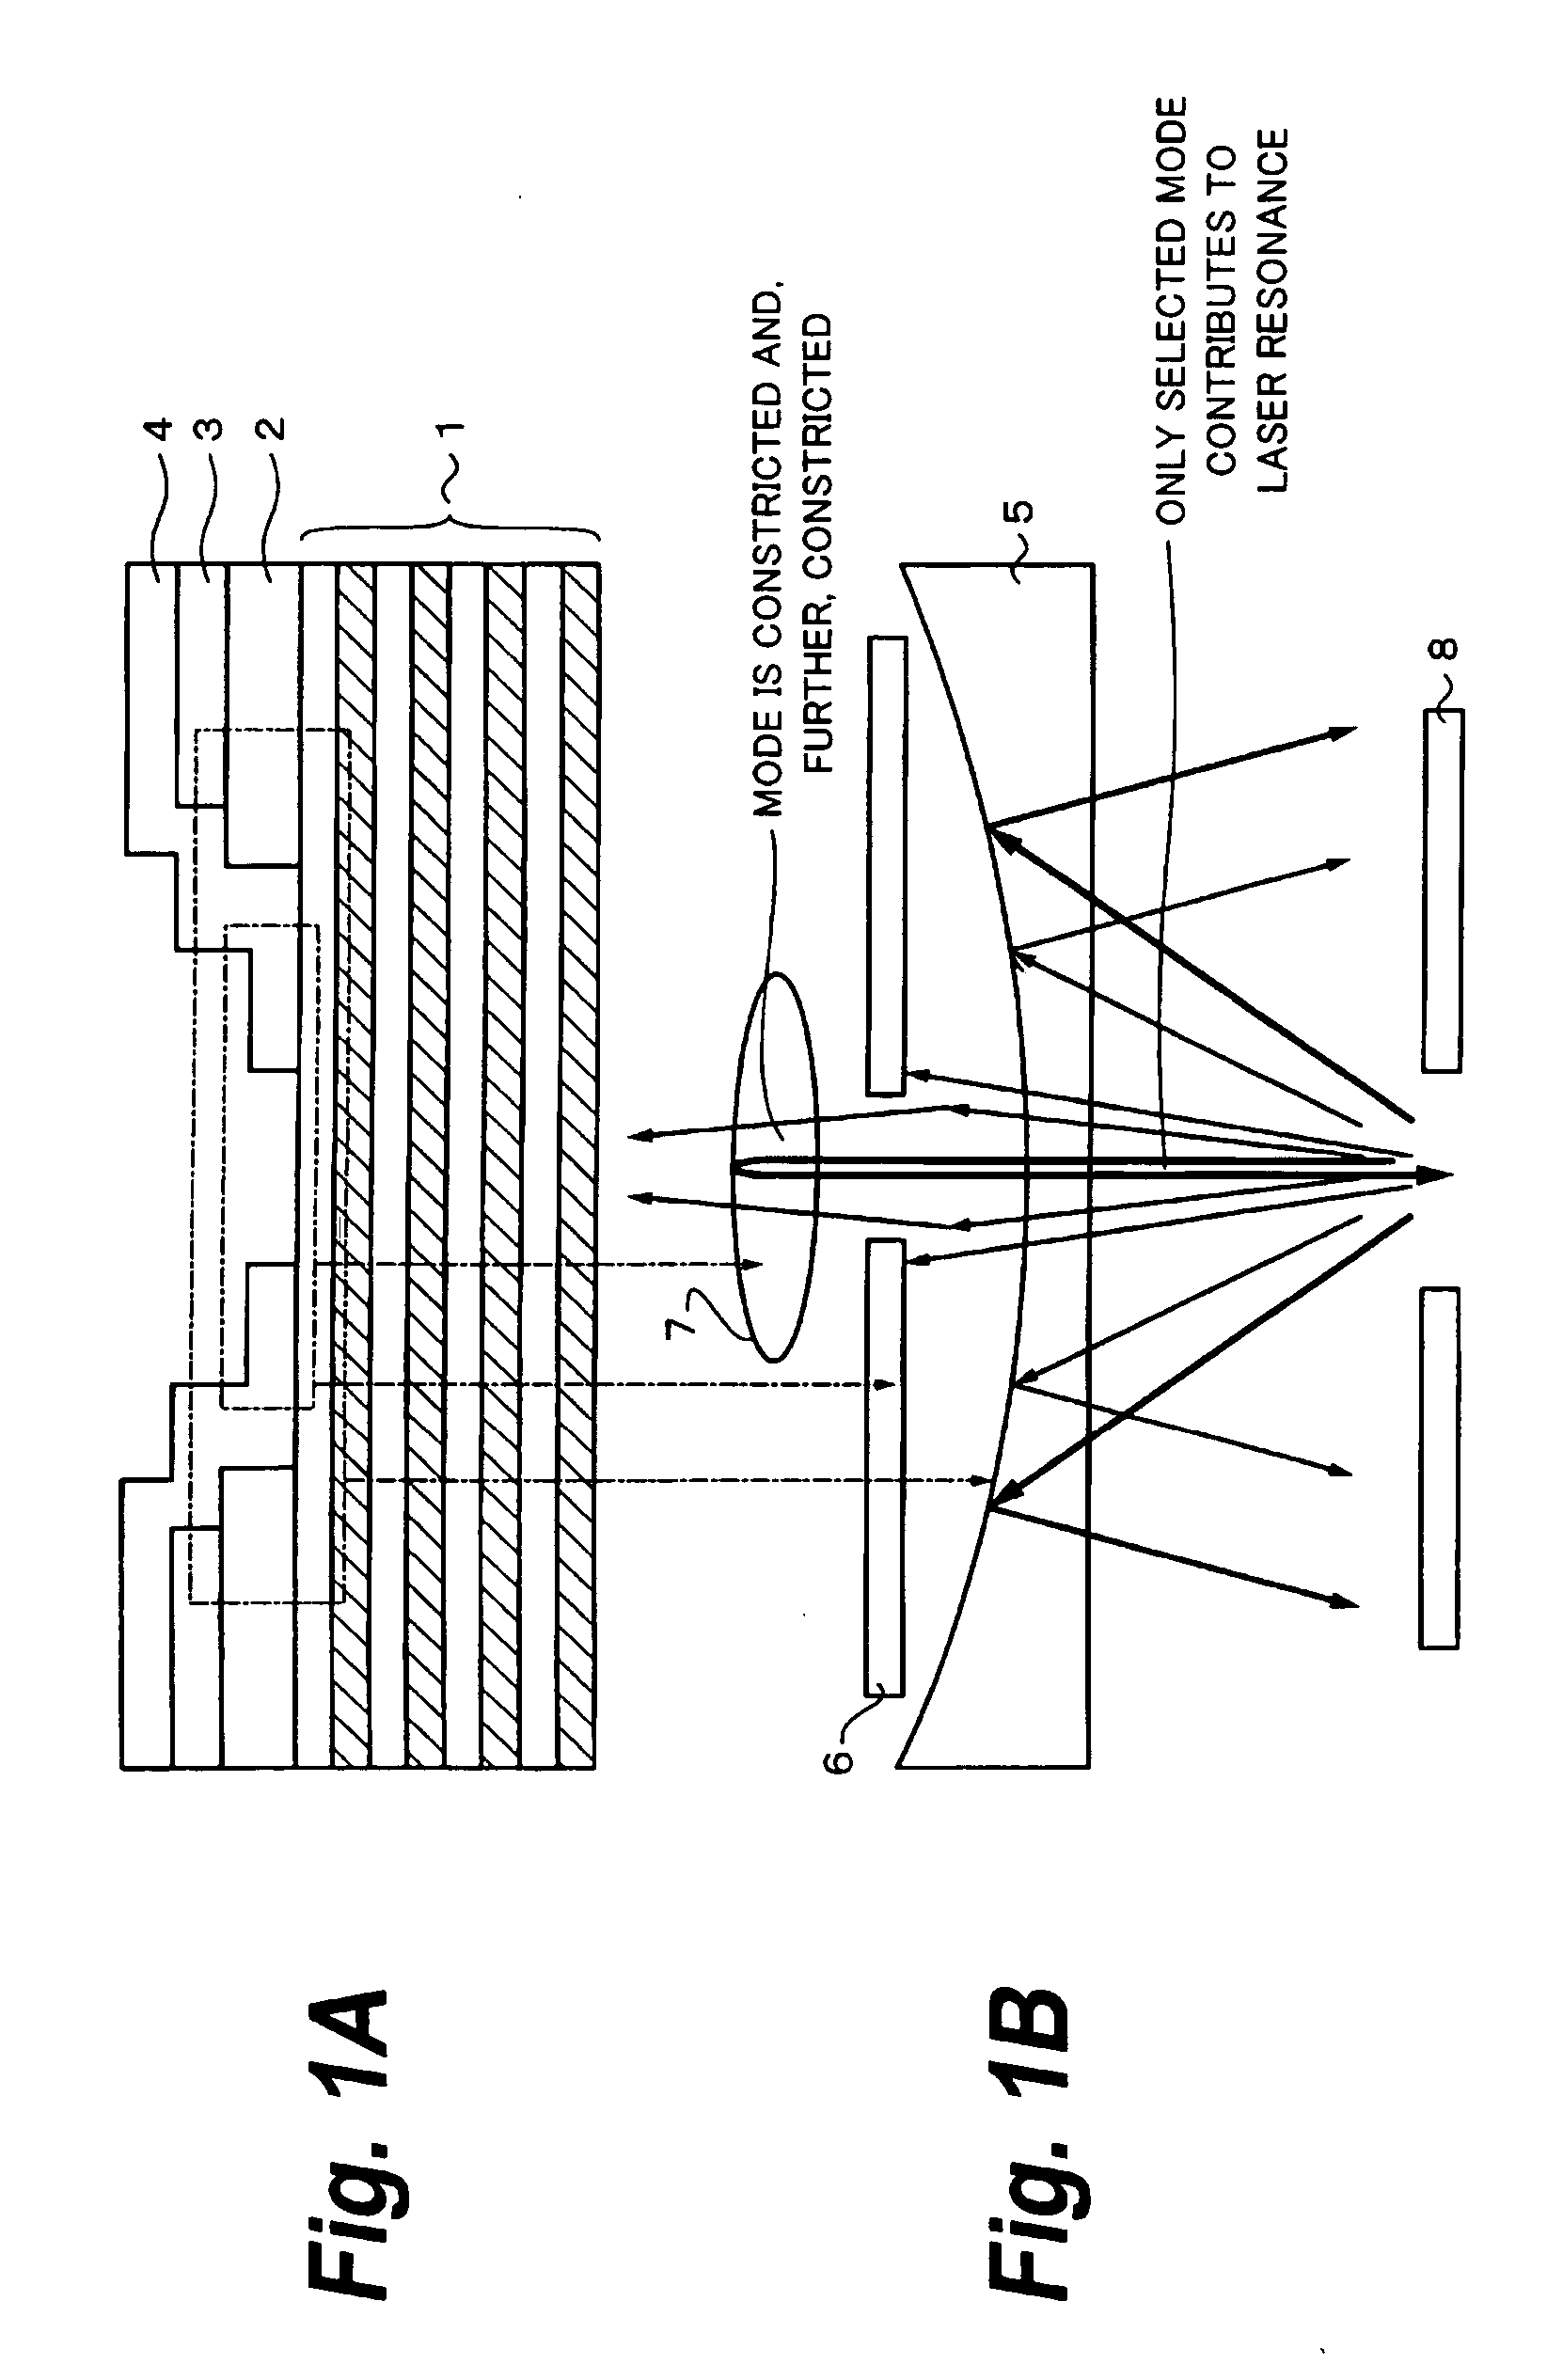 Surface emitting semiconductor laser, its manufacturing method, and manufacturing method of electron device